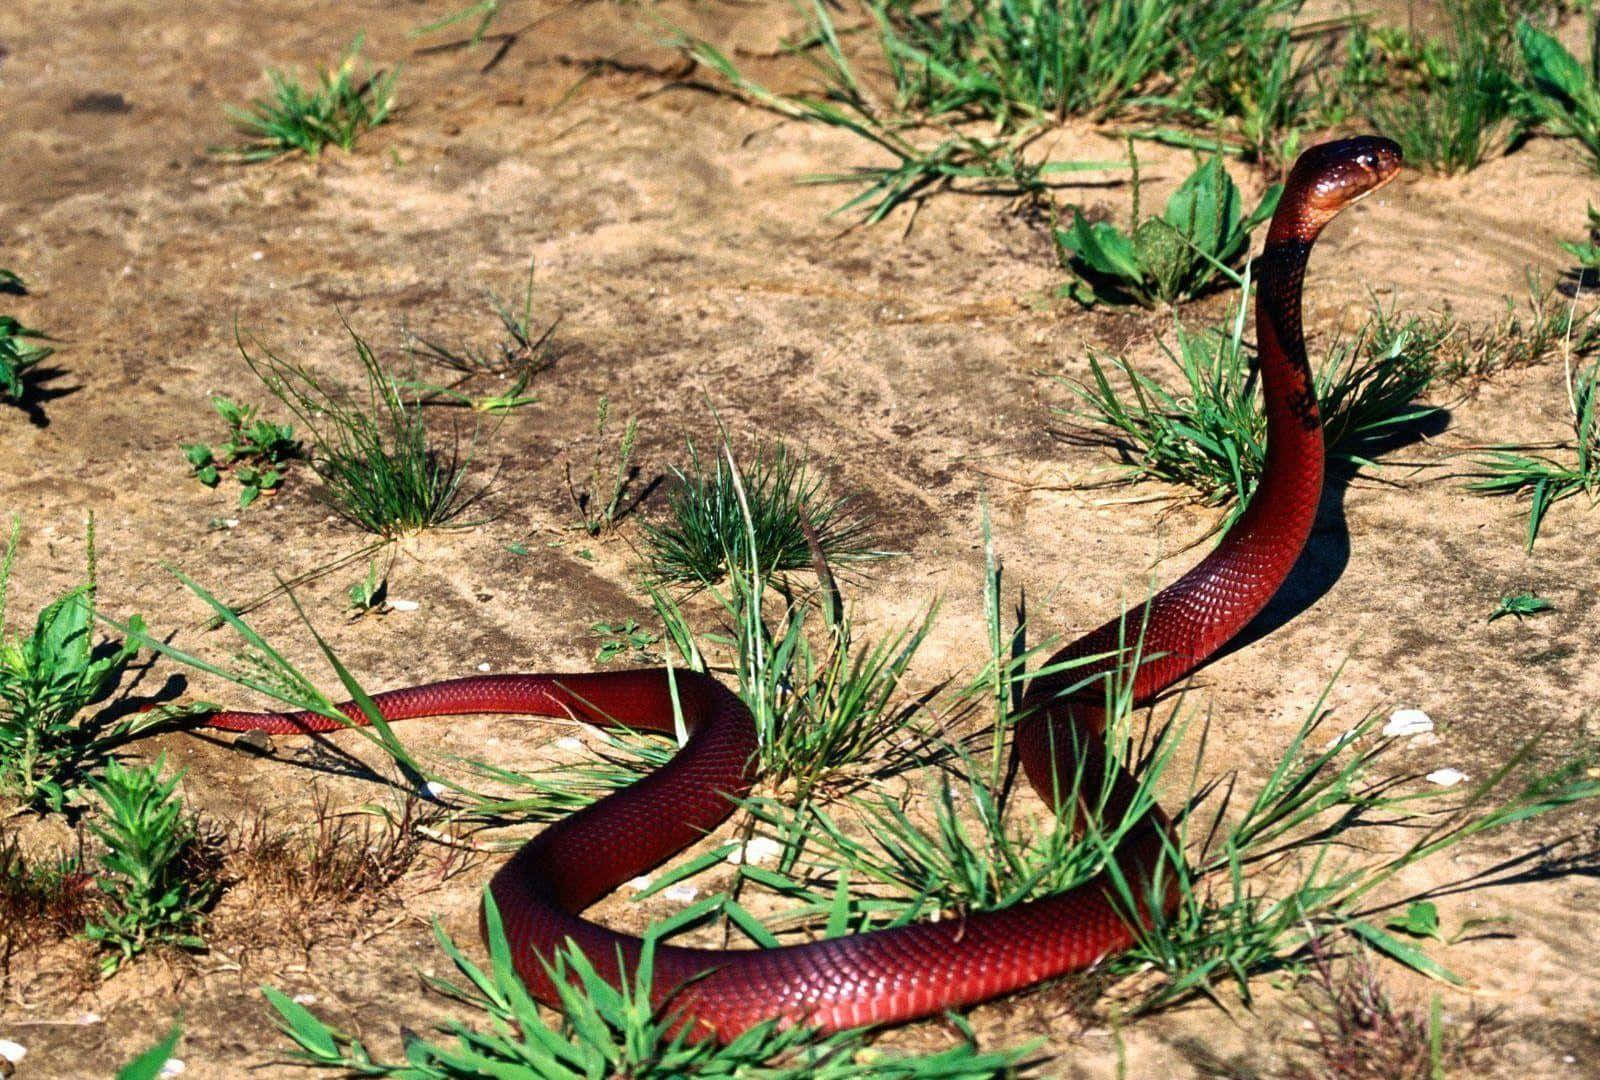 A Red Snake In The Dirt